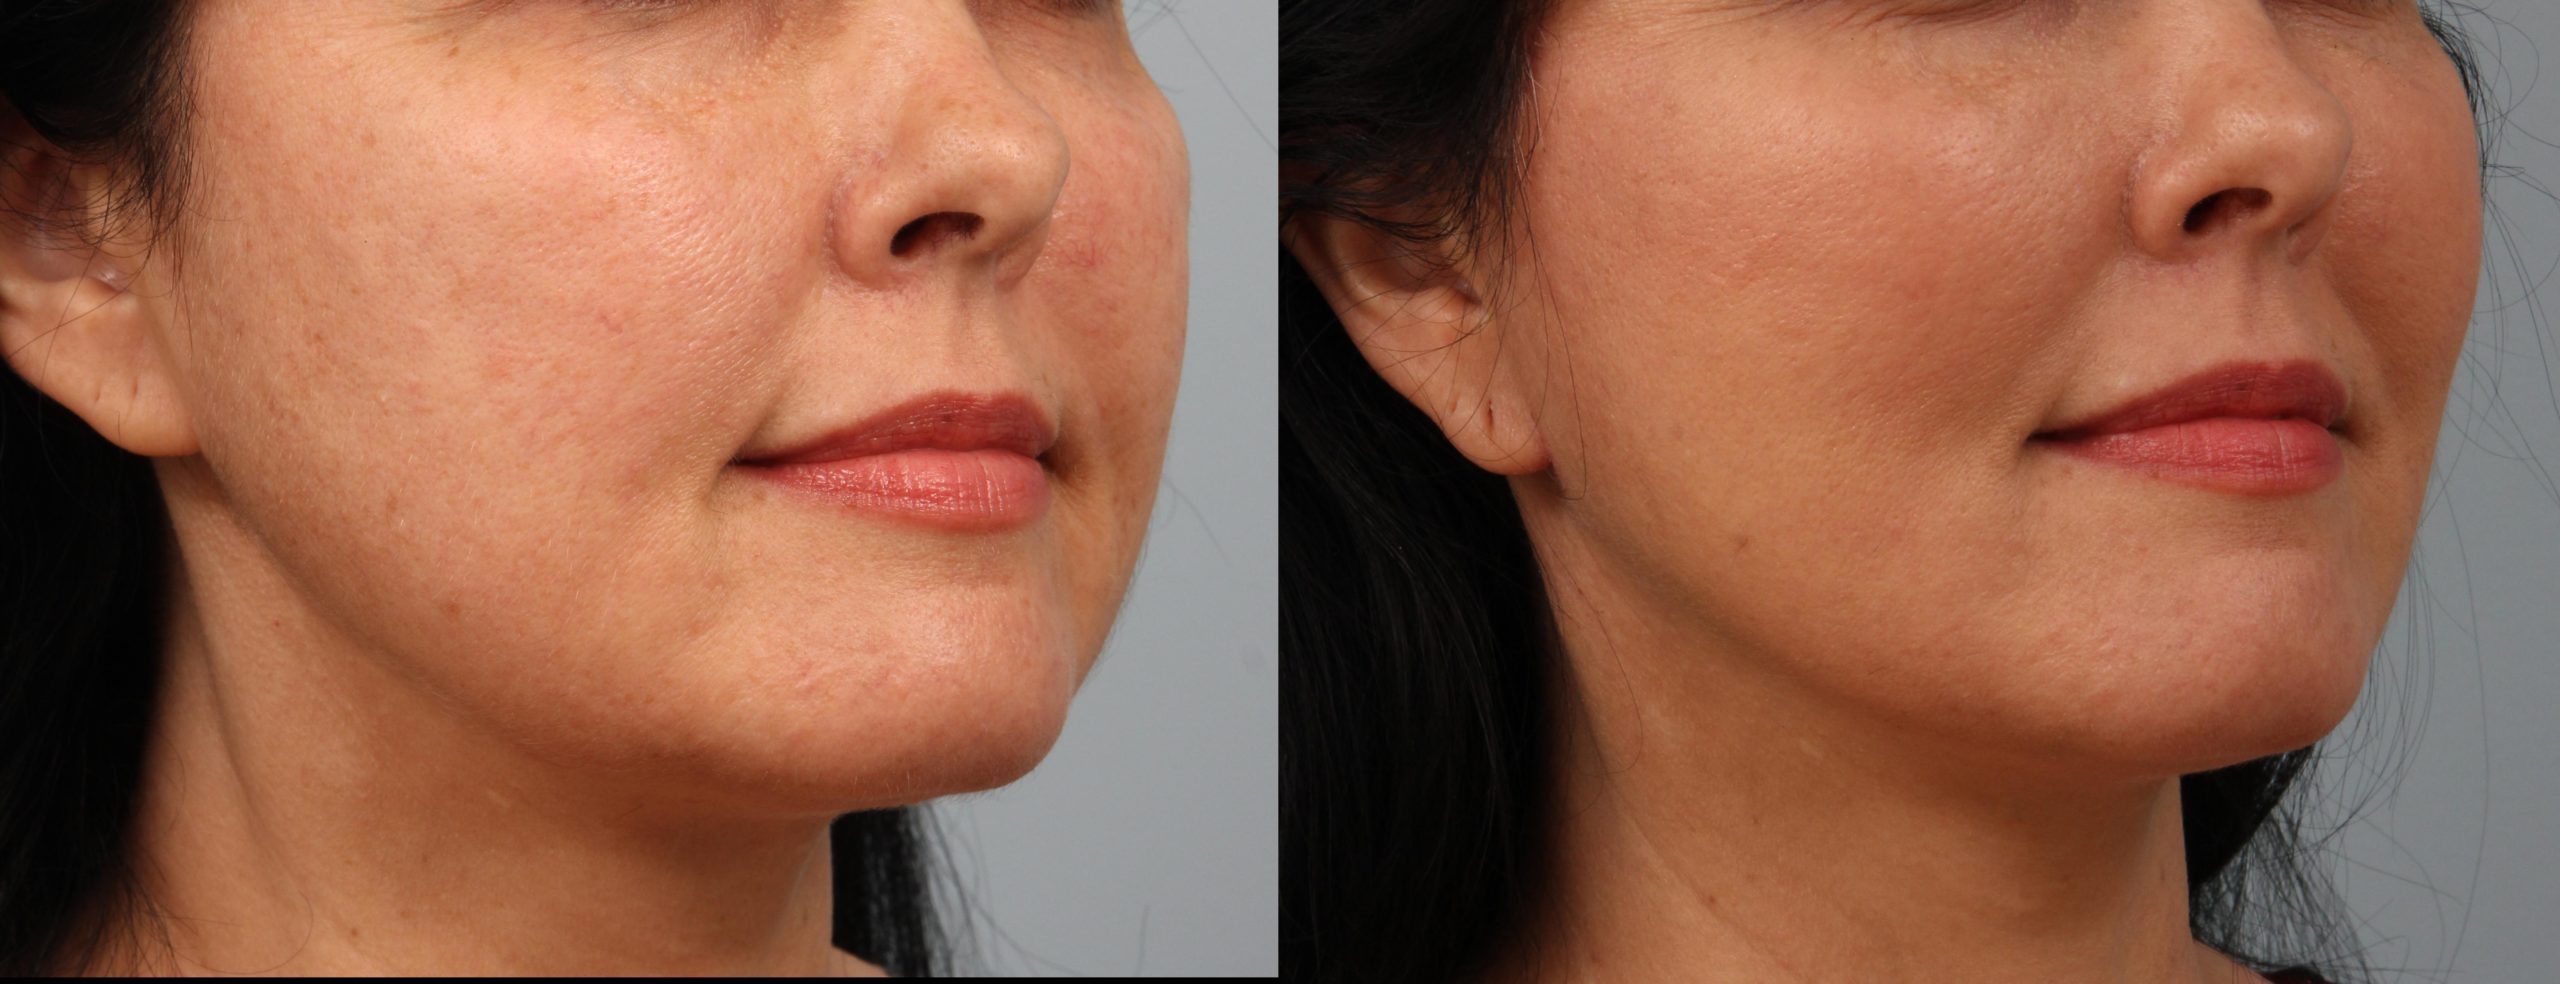 Buccal Fat Pad Removal San Francisco